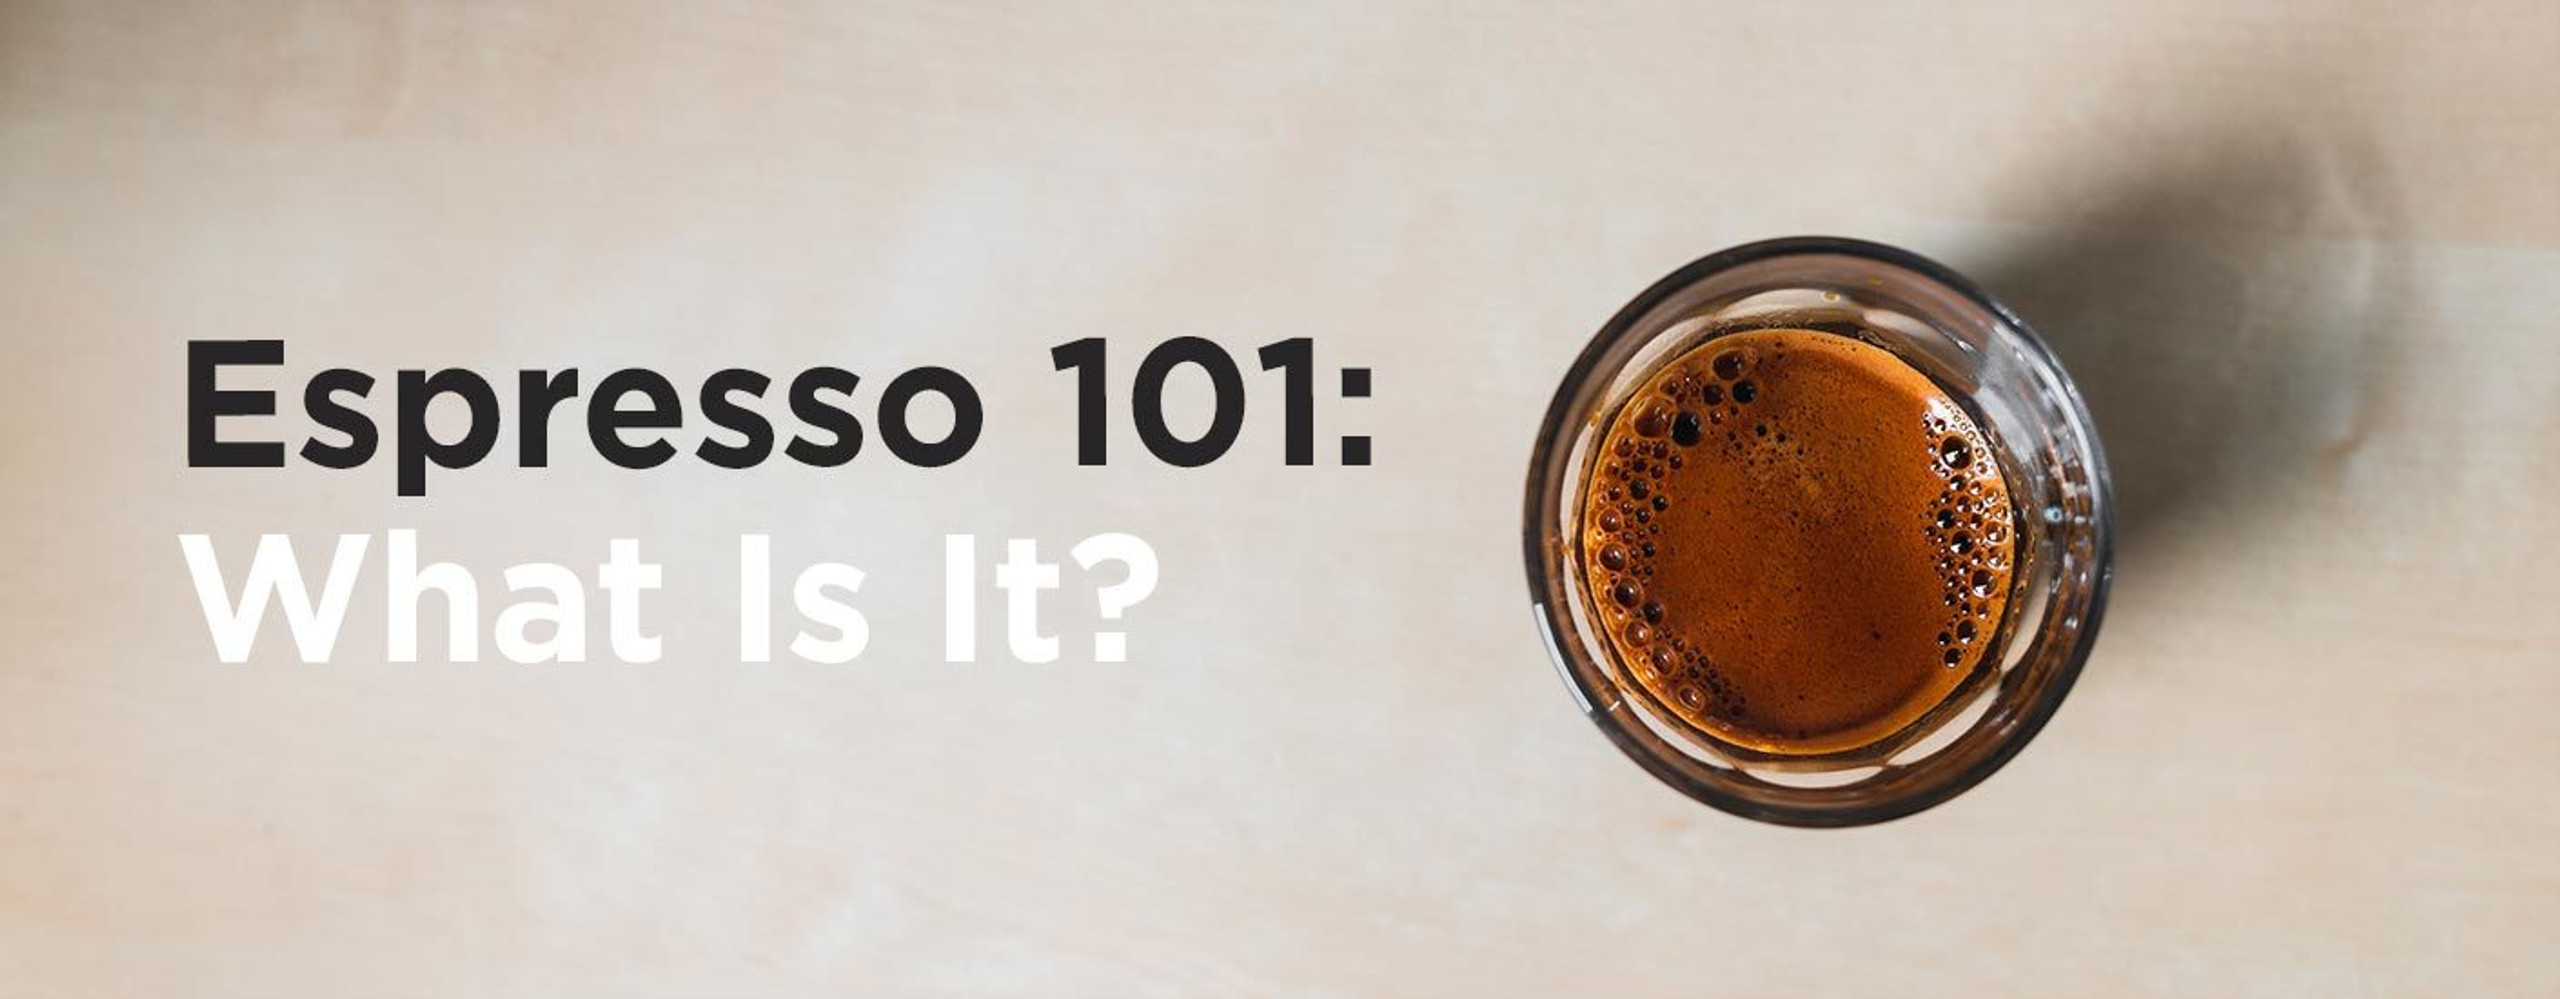 Espresso 101:what is it?